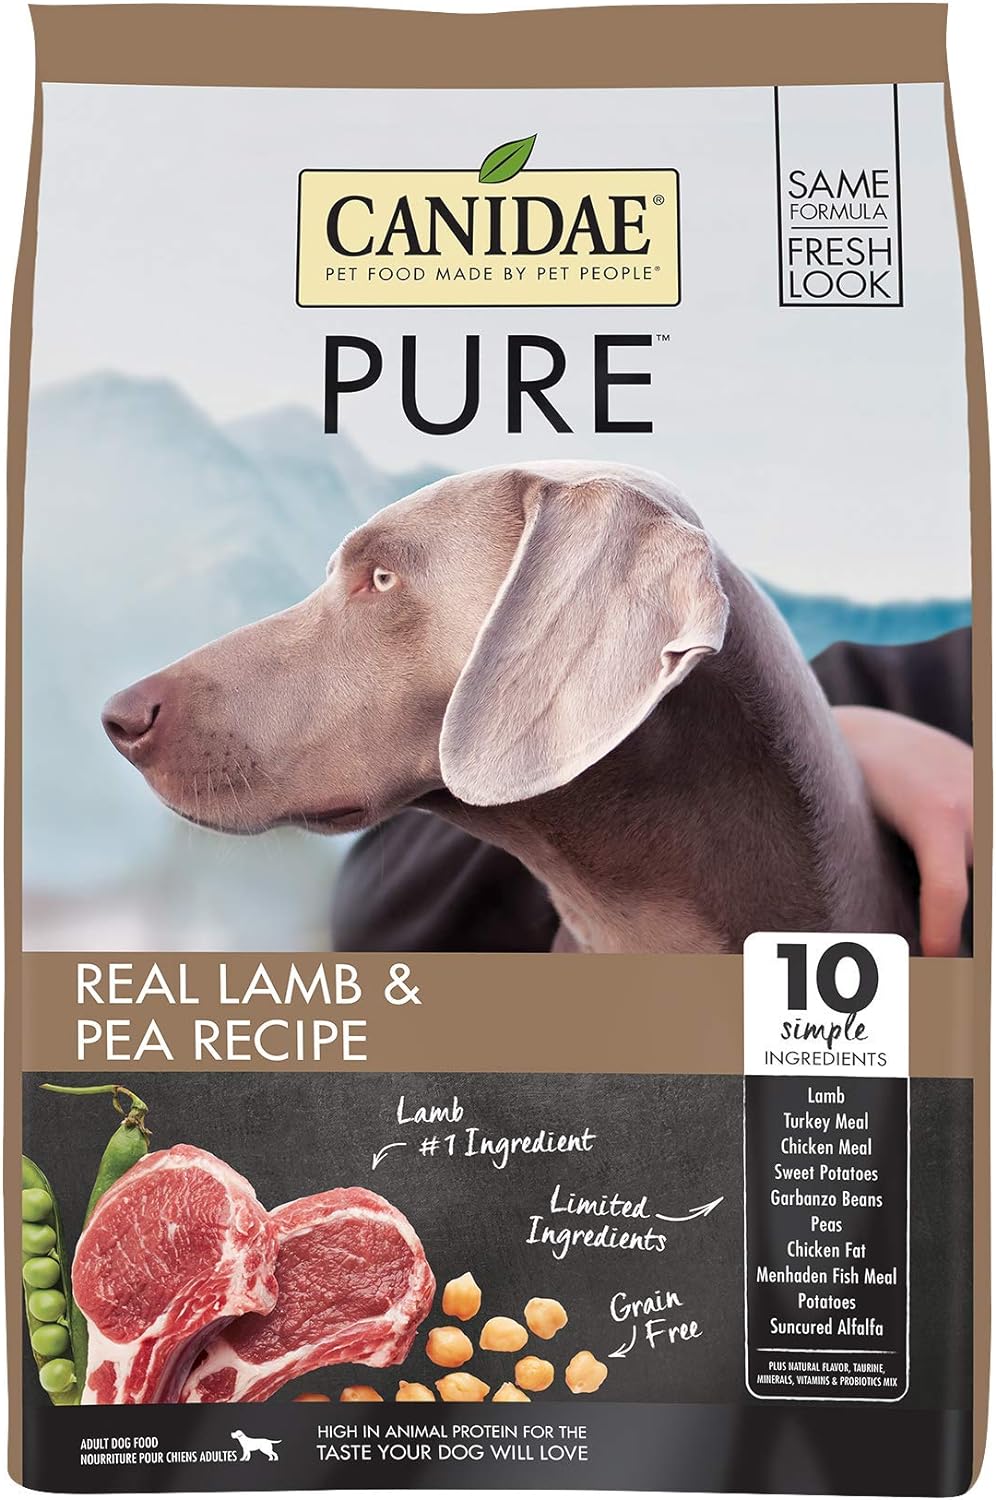 Canidae PURE Limited Ingredient Premium Adult Dry Dog Food, Lamb and Pea Recipe, 4 Pounds, Grain Free